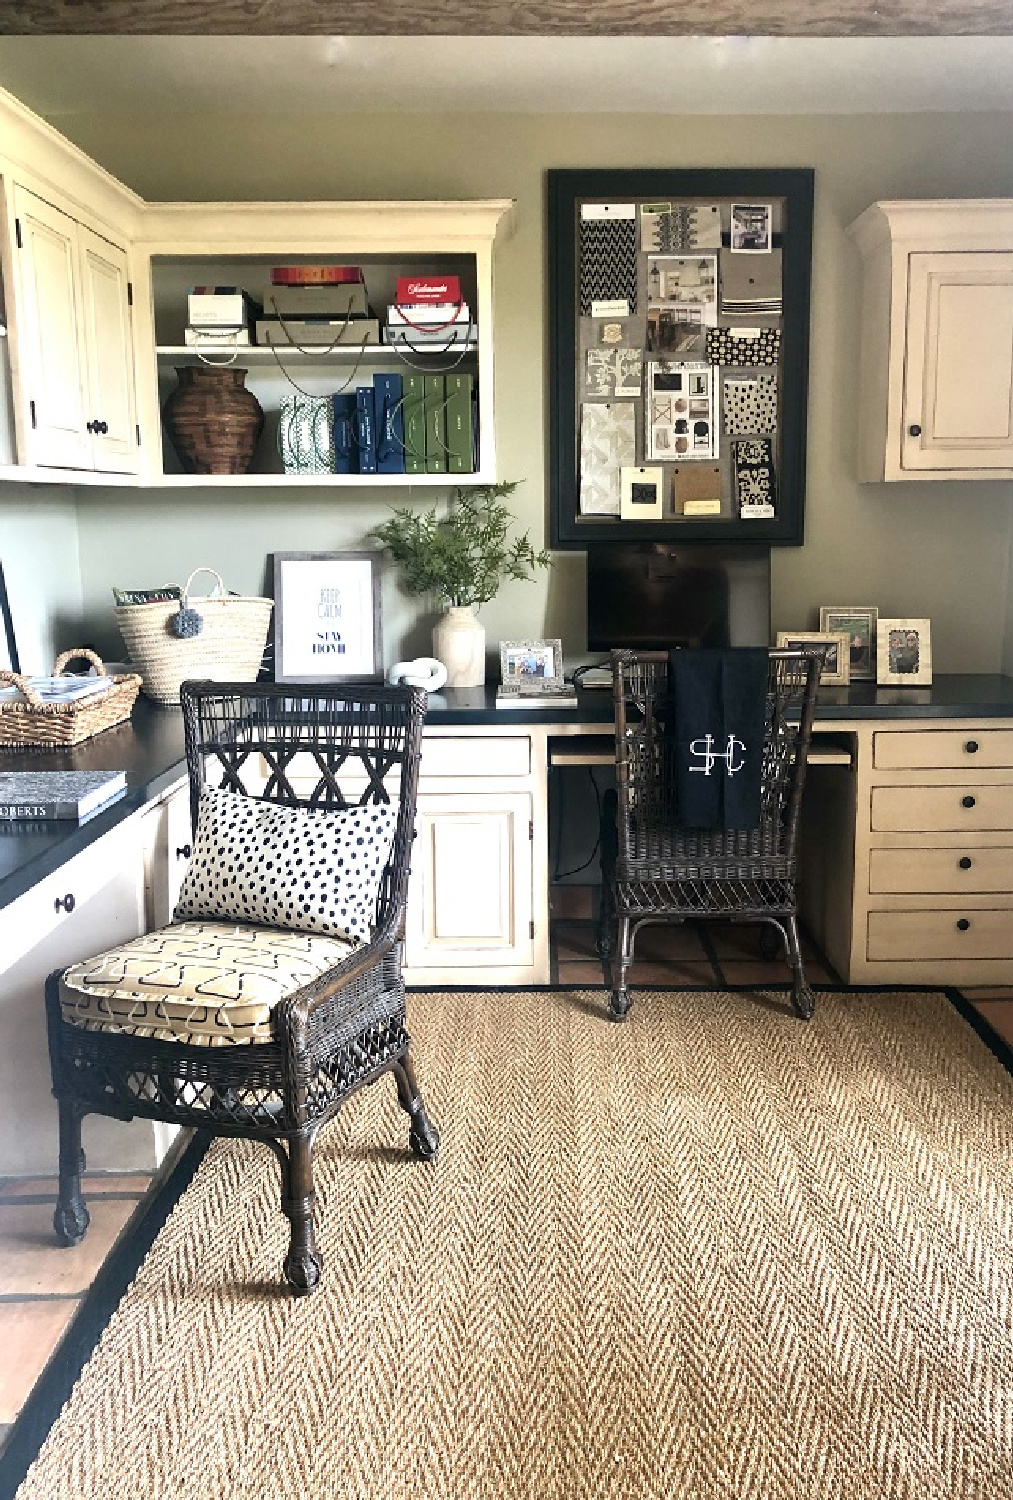 Home office with multiple work areas and white cabinetry - Cindy Hattersley. #homeoffice